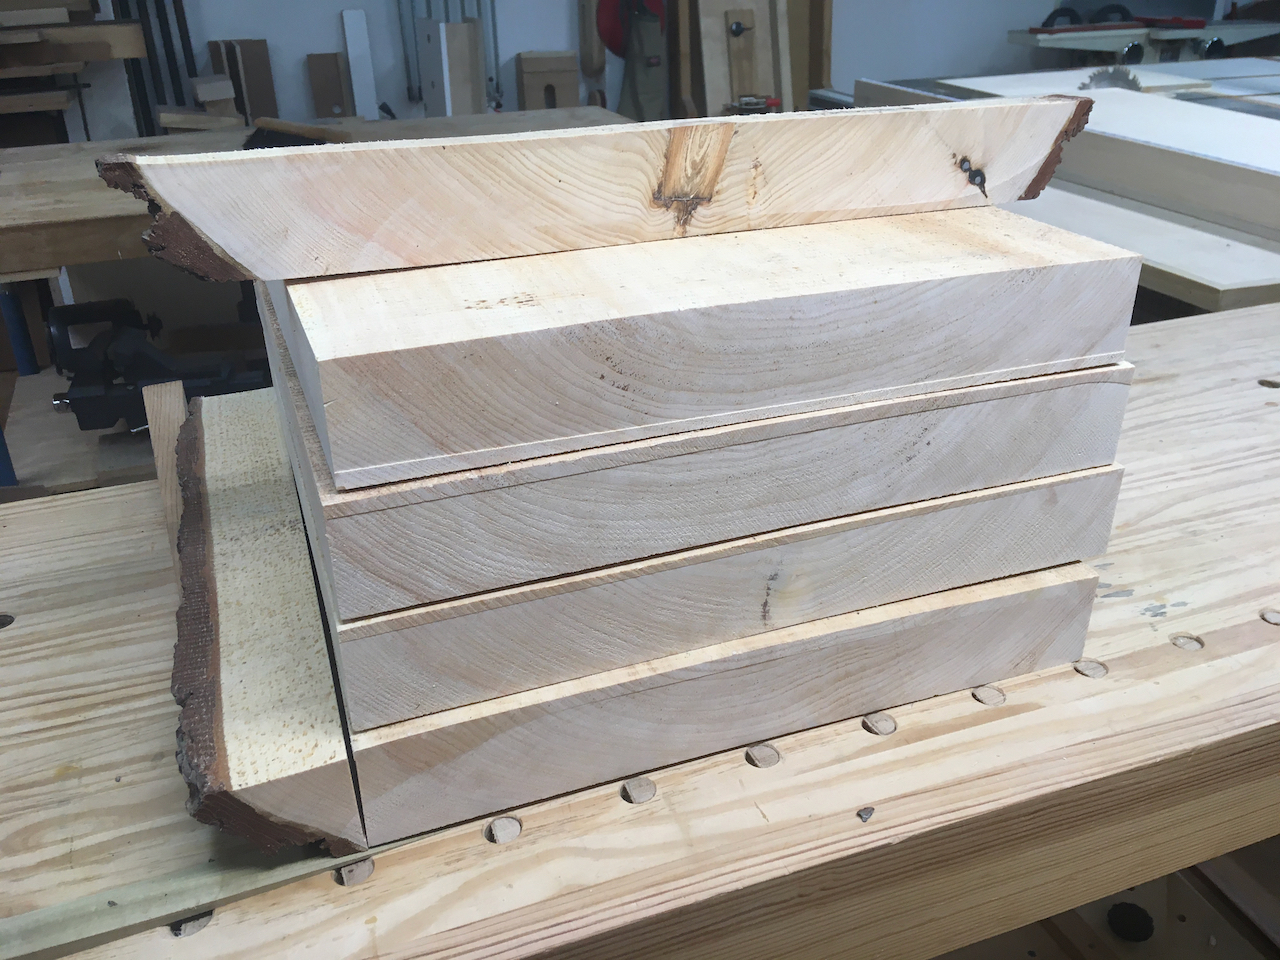 Four rough chair blanks stacked, with a removed edge alongside and a full width cutoff strip on top